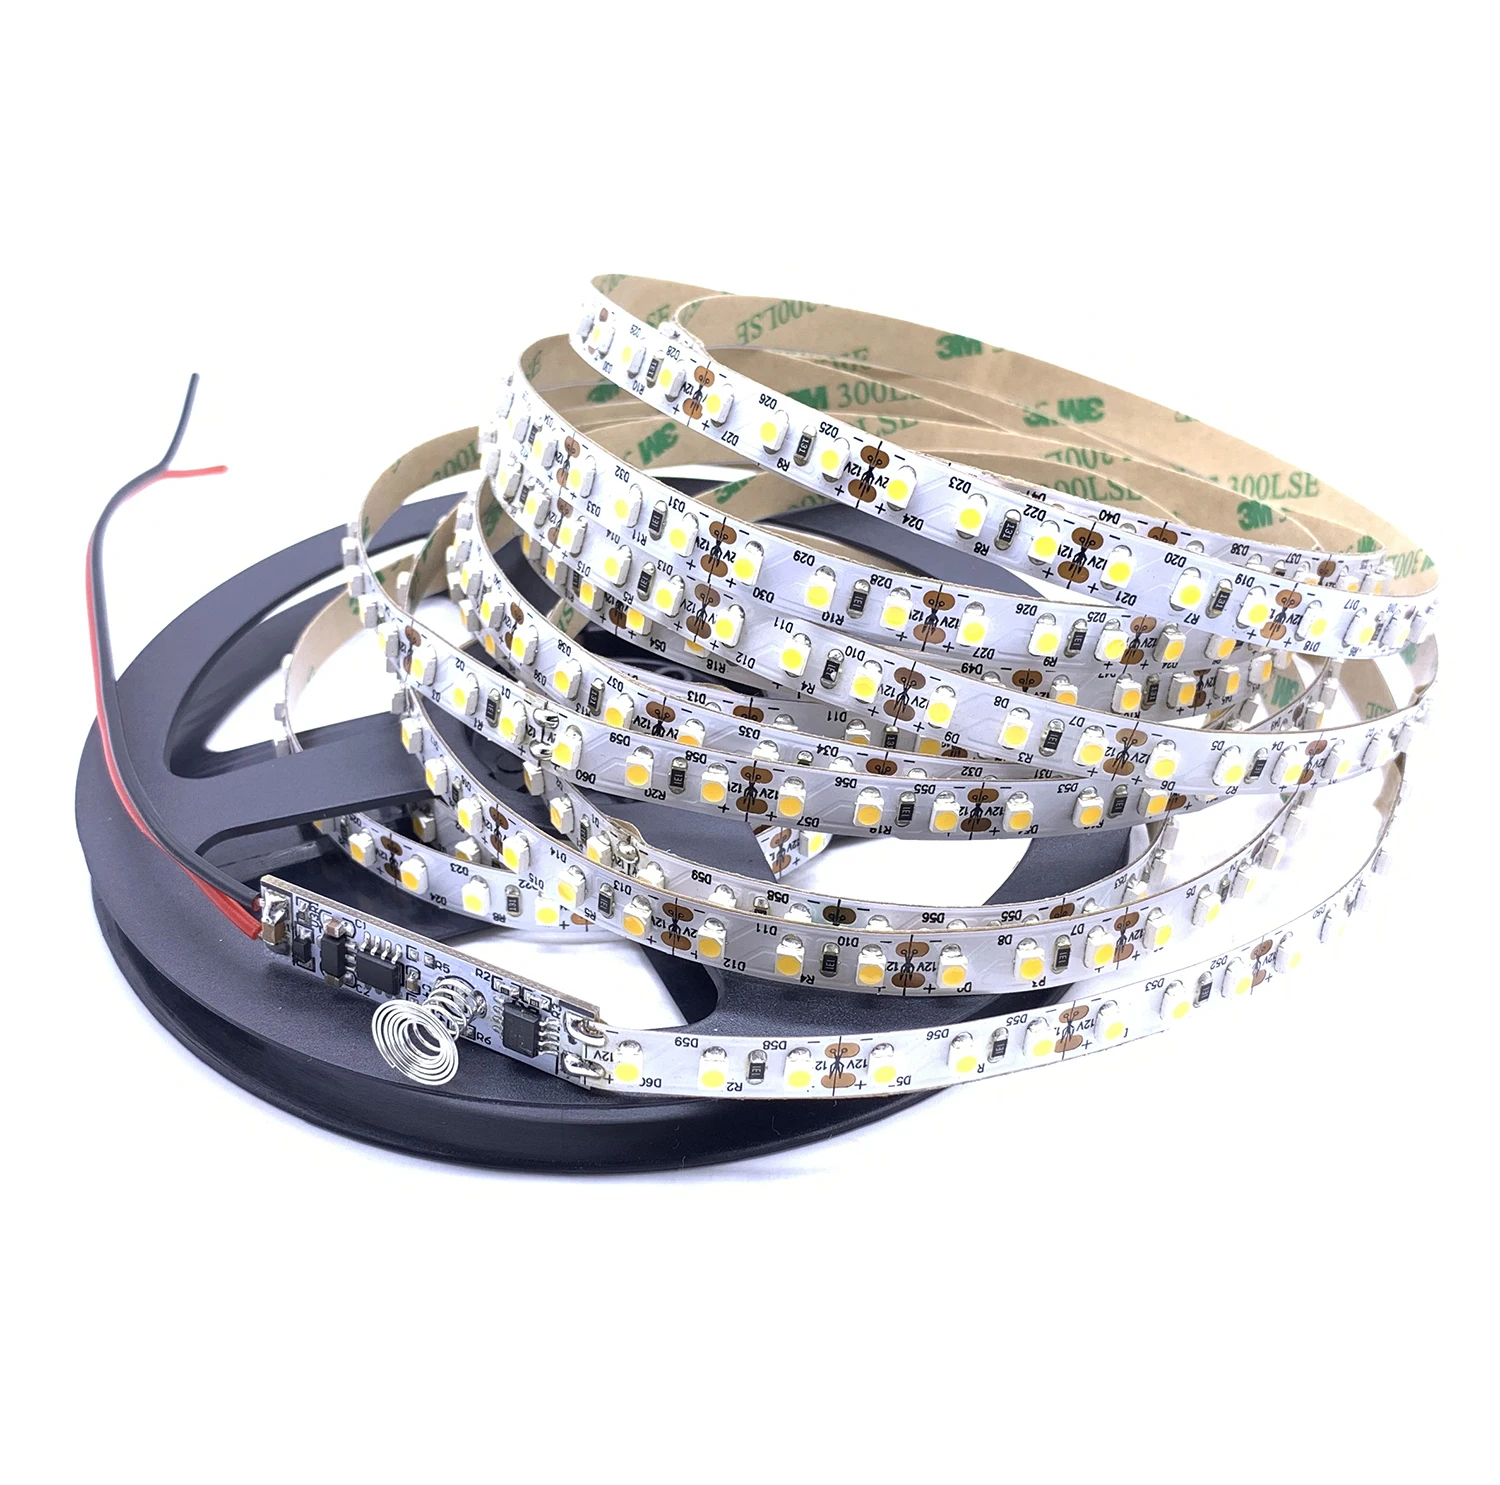 LED cabinet light 9.6W SMD 3528 LED Strip 120LEDs/m with Touch Sensor Switch on off